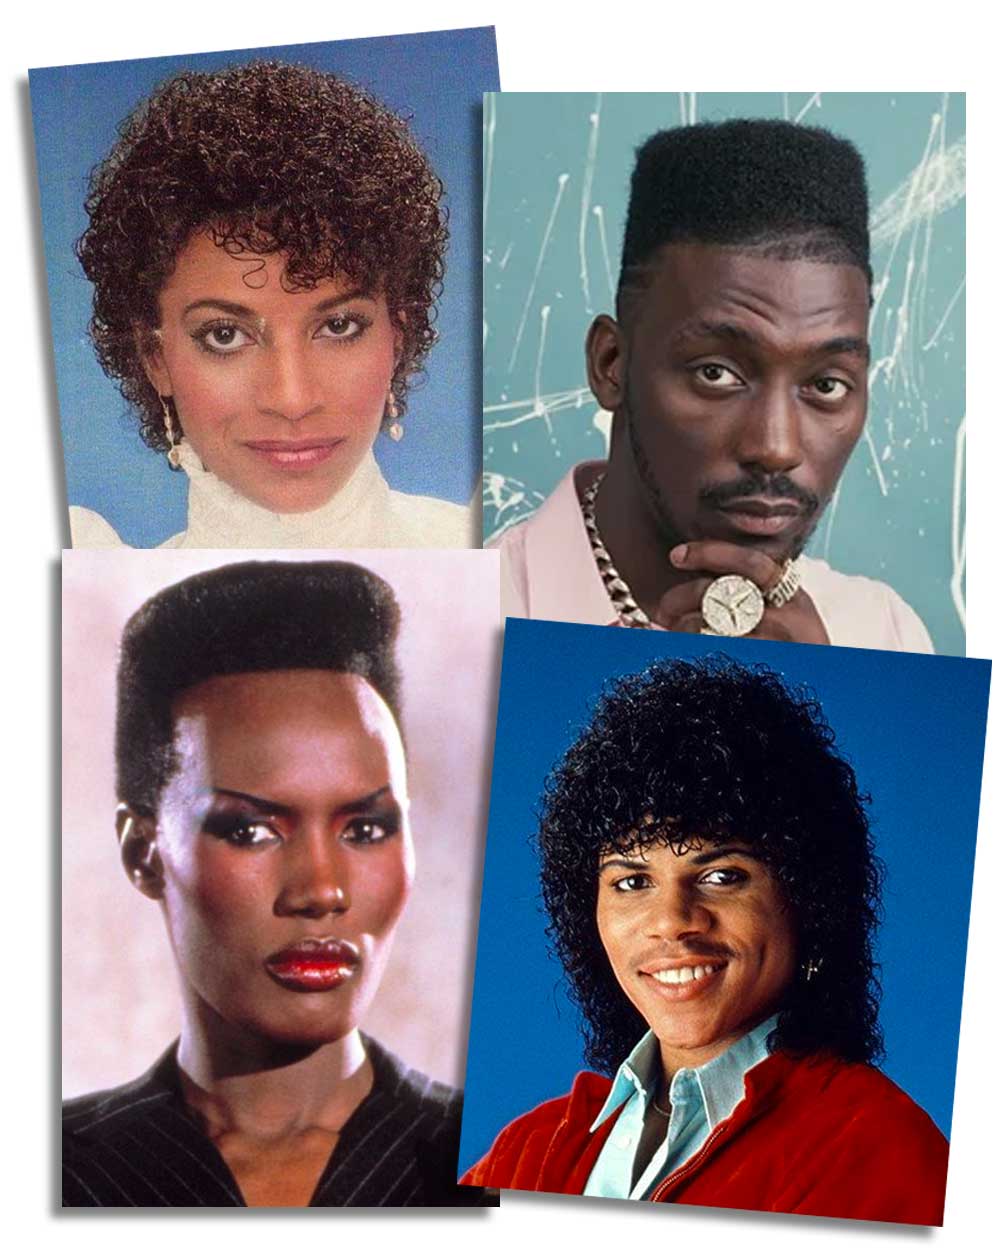 80s popular hairstyles in black fashion